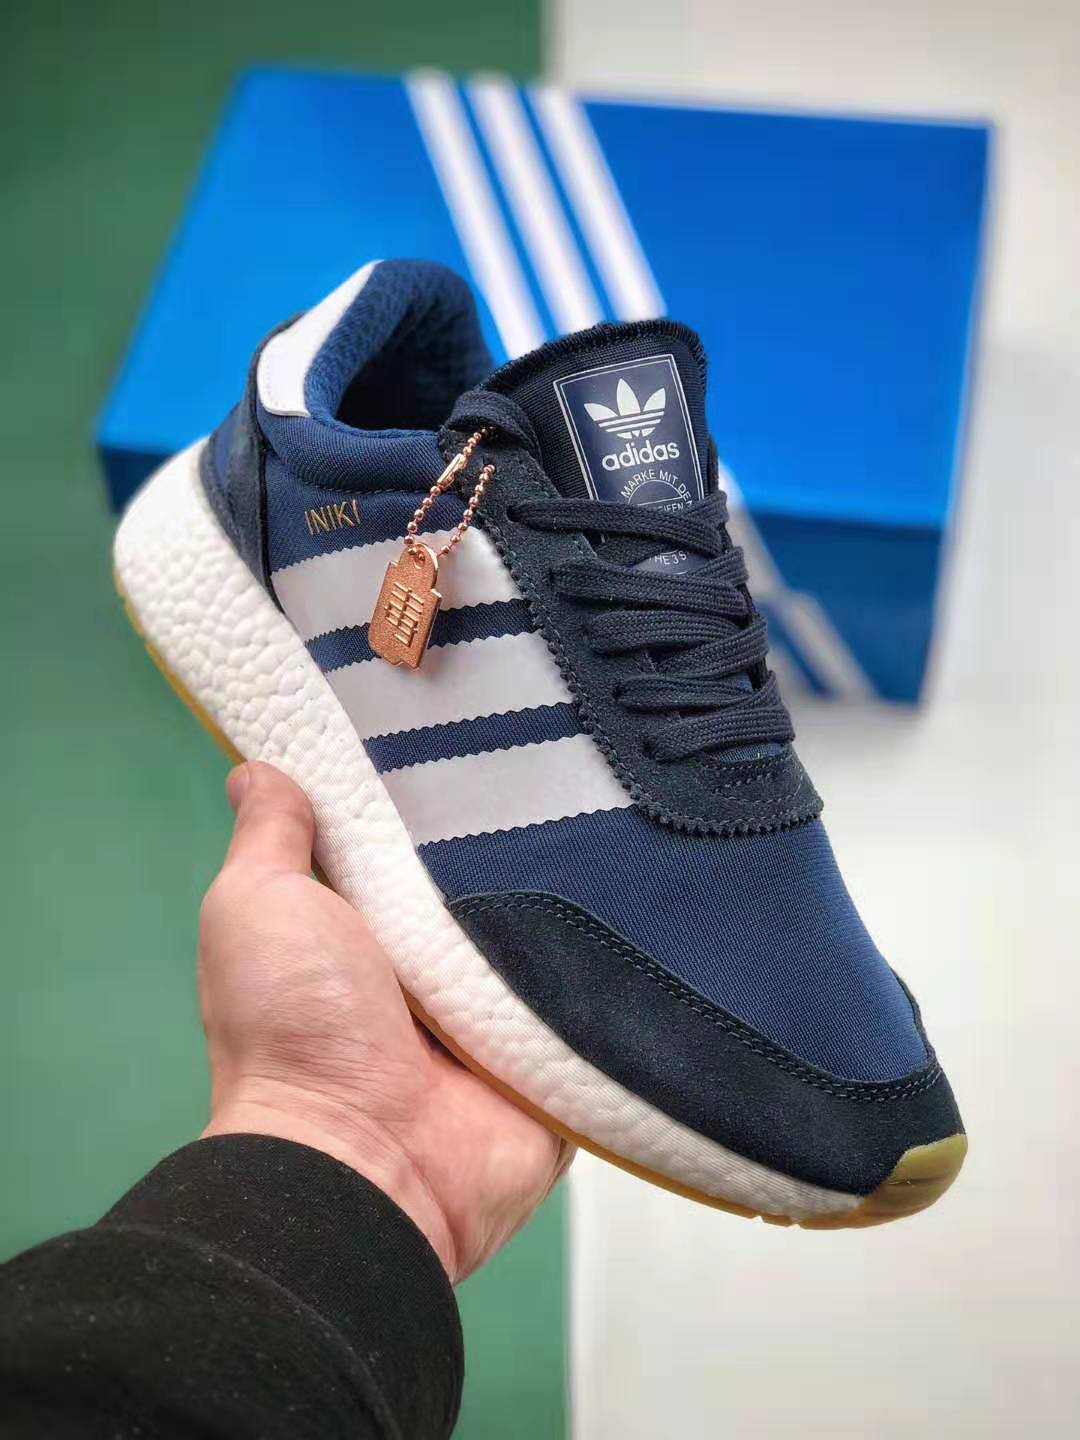 Adidas Iniki Runner 'Navy' BY9729 - Stylish Footwear with Classic Design